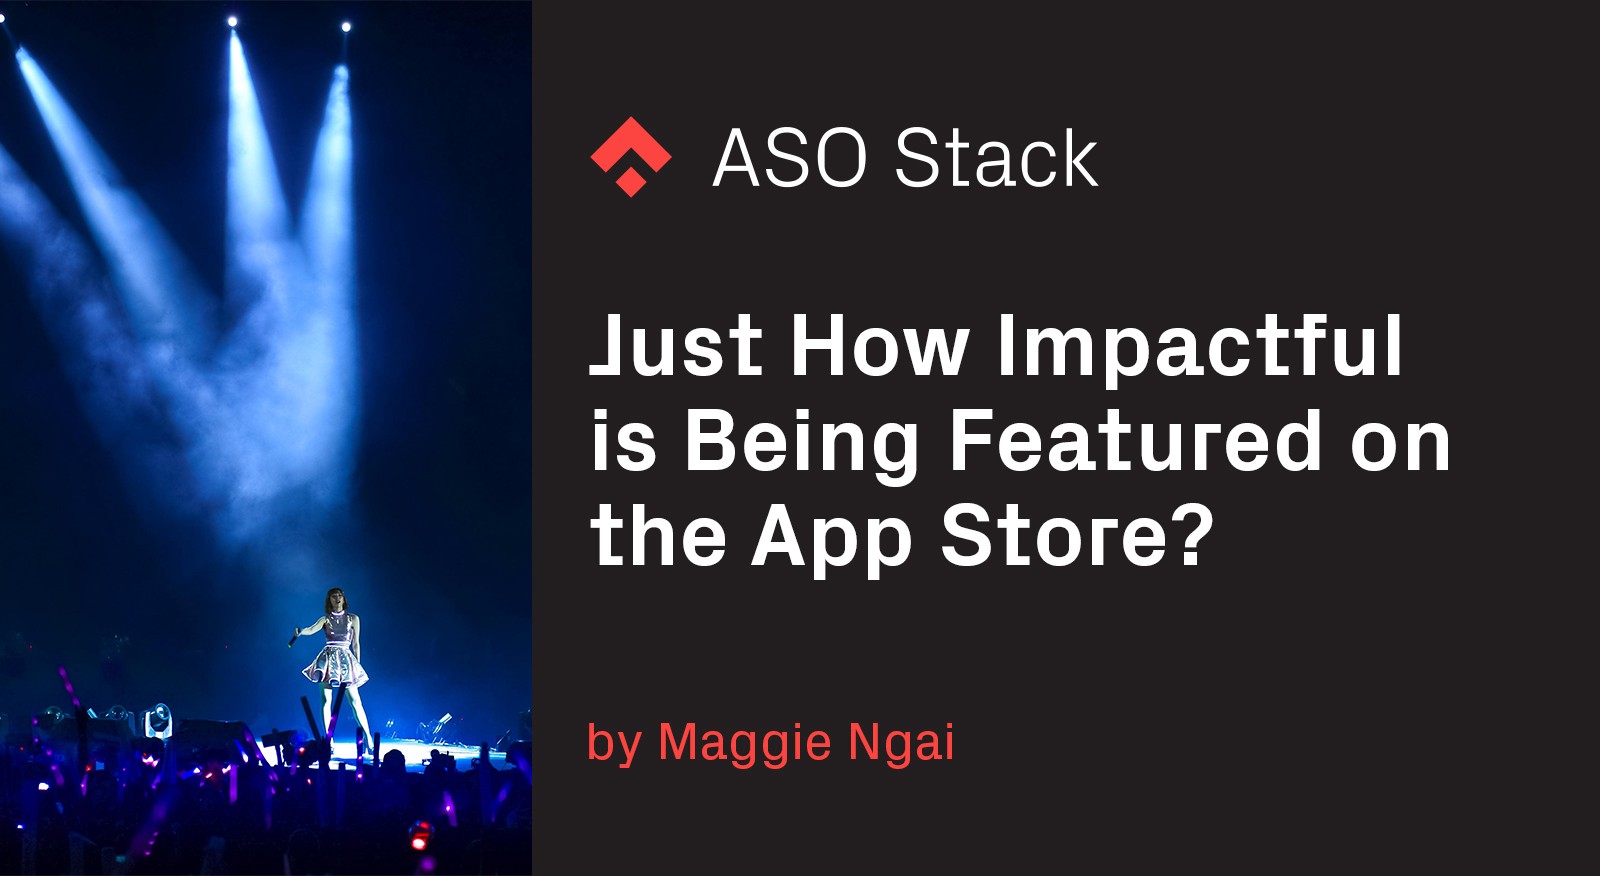 Just How Impactful is Being Featured on the App Store?